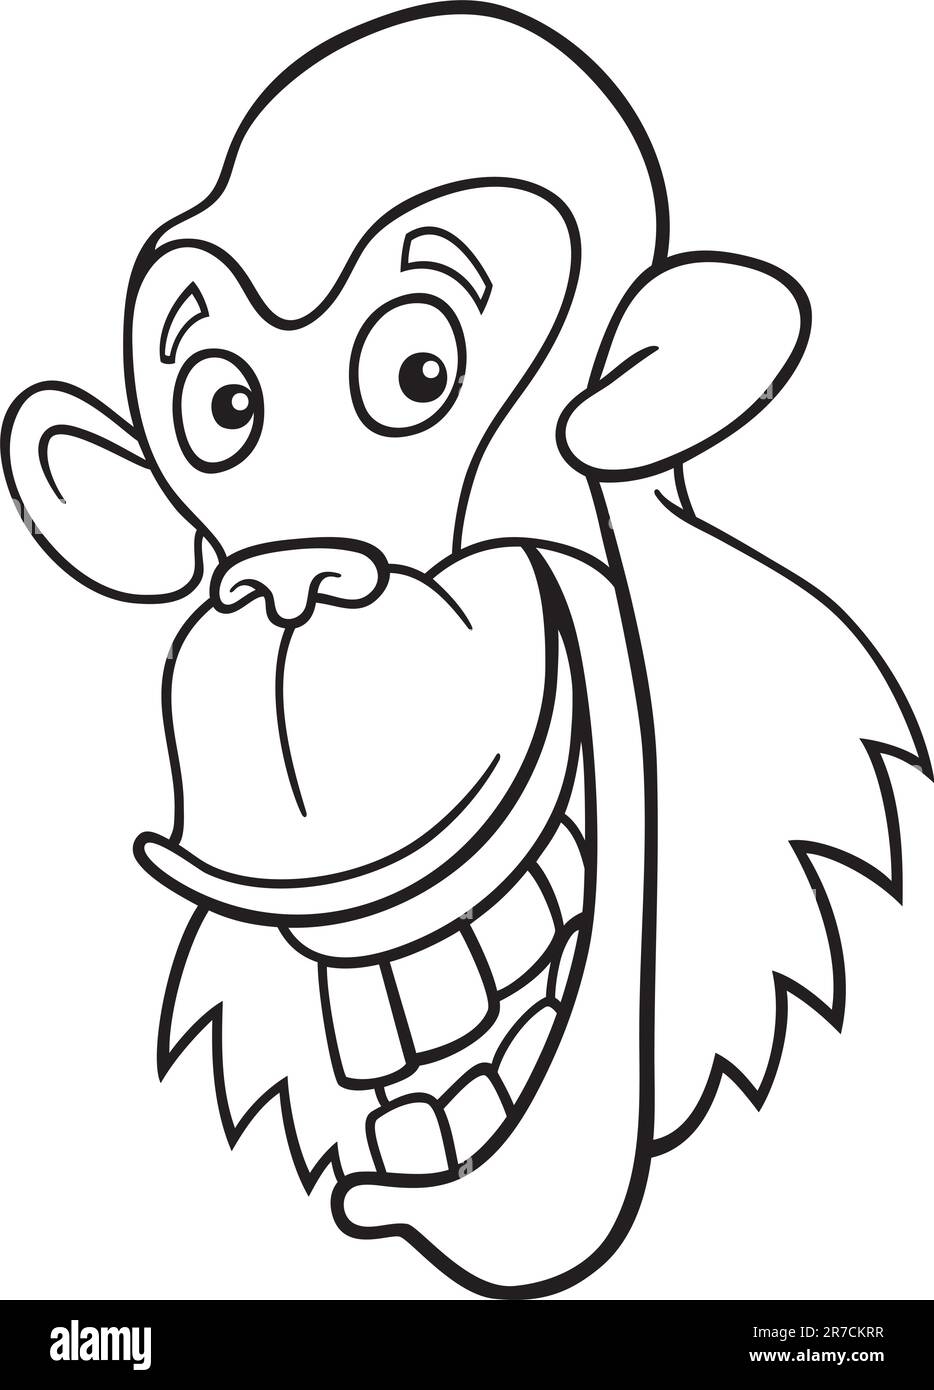 cartoon illustration of funny chimpanzee ape for coloring book Stock Vector